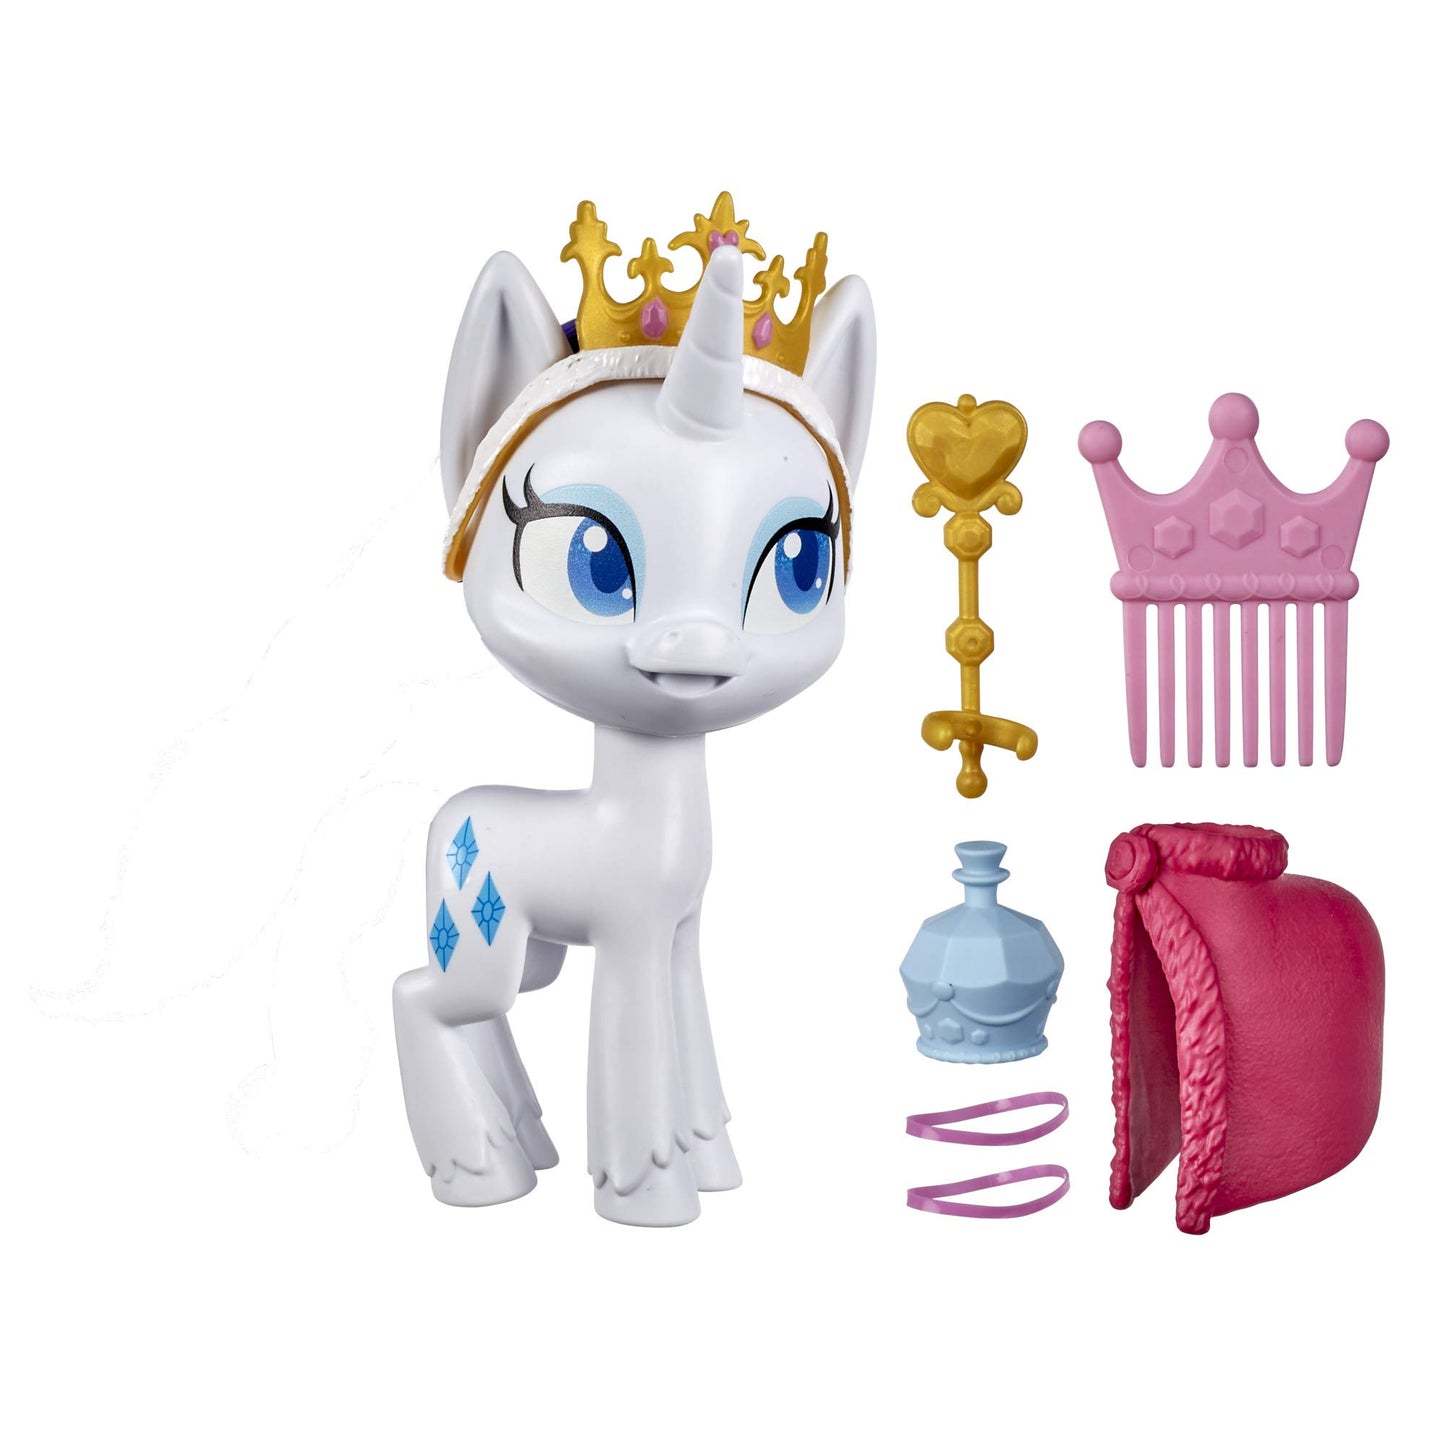 My Little Pony Rarity Potion Dress Up Figure -- 5-Inch White Pony Toy with Dress-Up Fashion Accessories, Brushable Hair and Comb